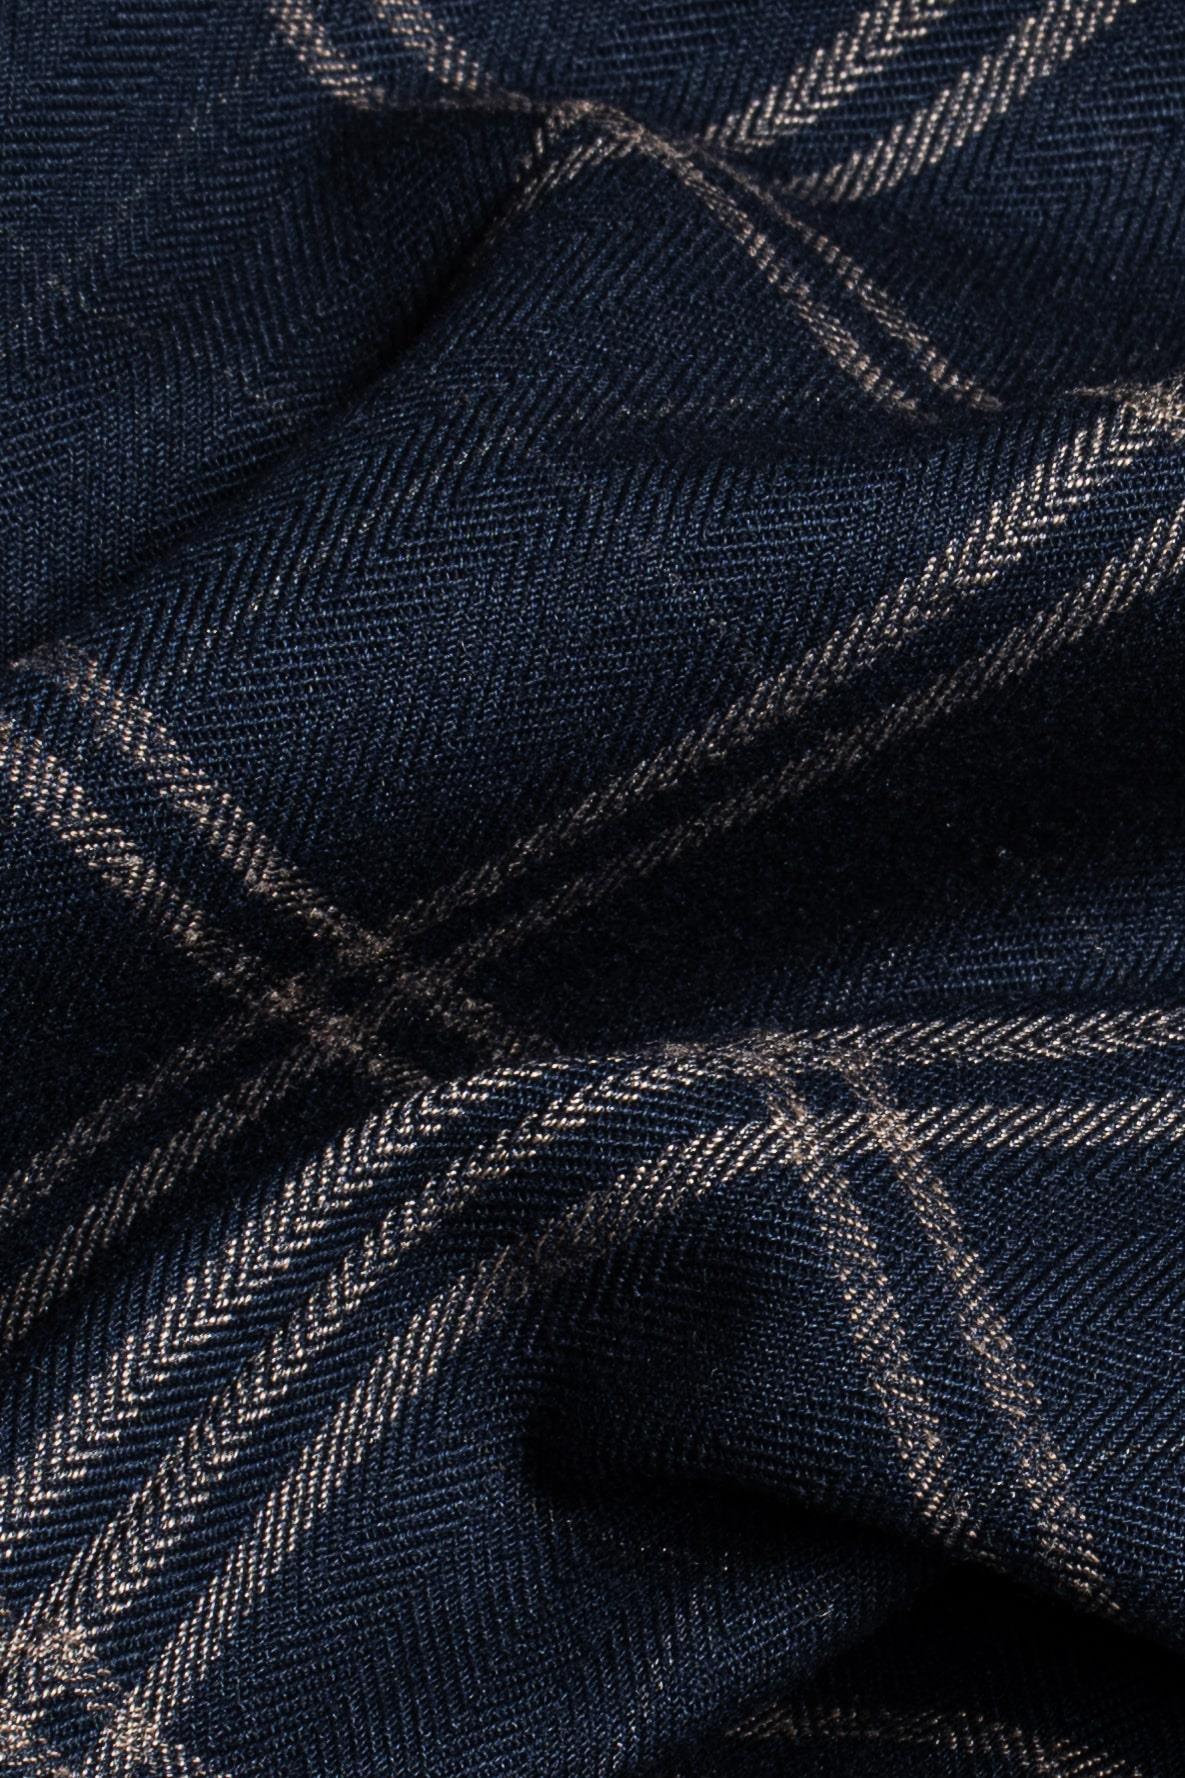 Hardy navy check three piece suit fabric swatch